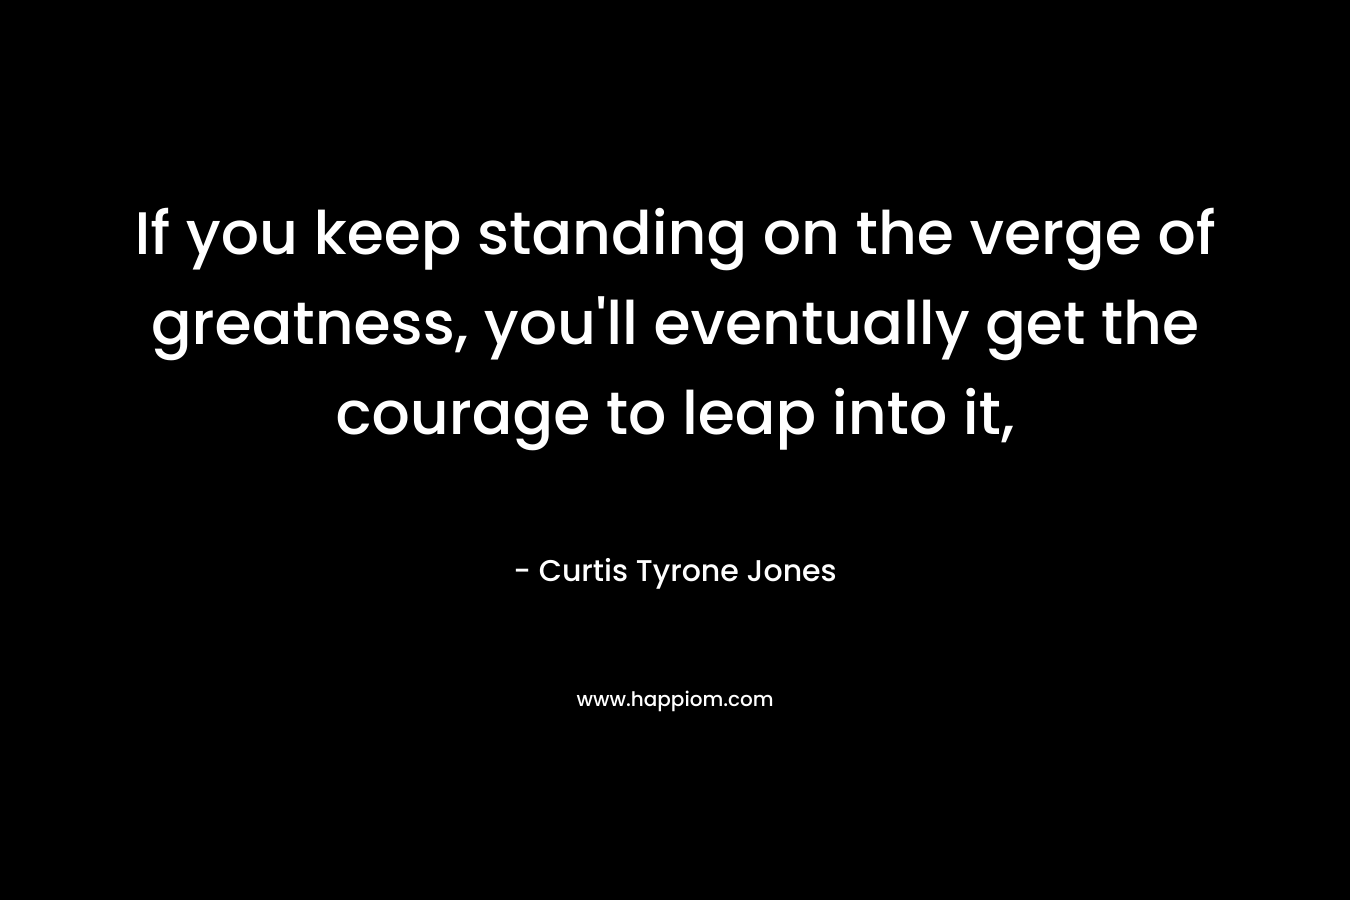 If you keep standing on the verge of greatness, you'll eventually get the courage to leap into it,